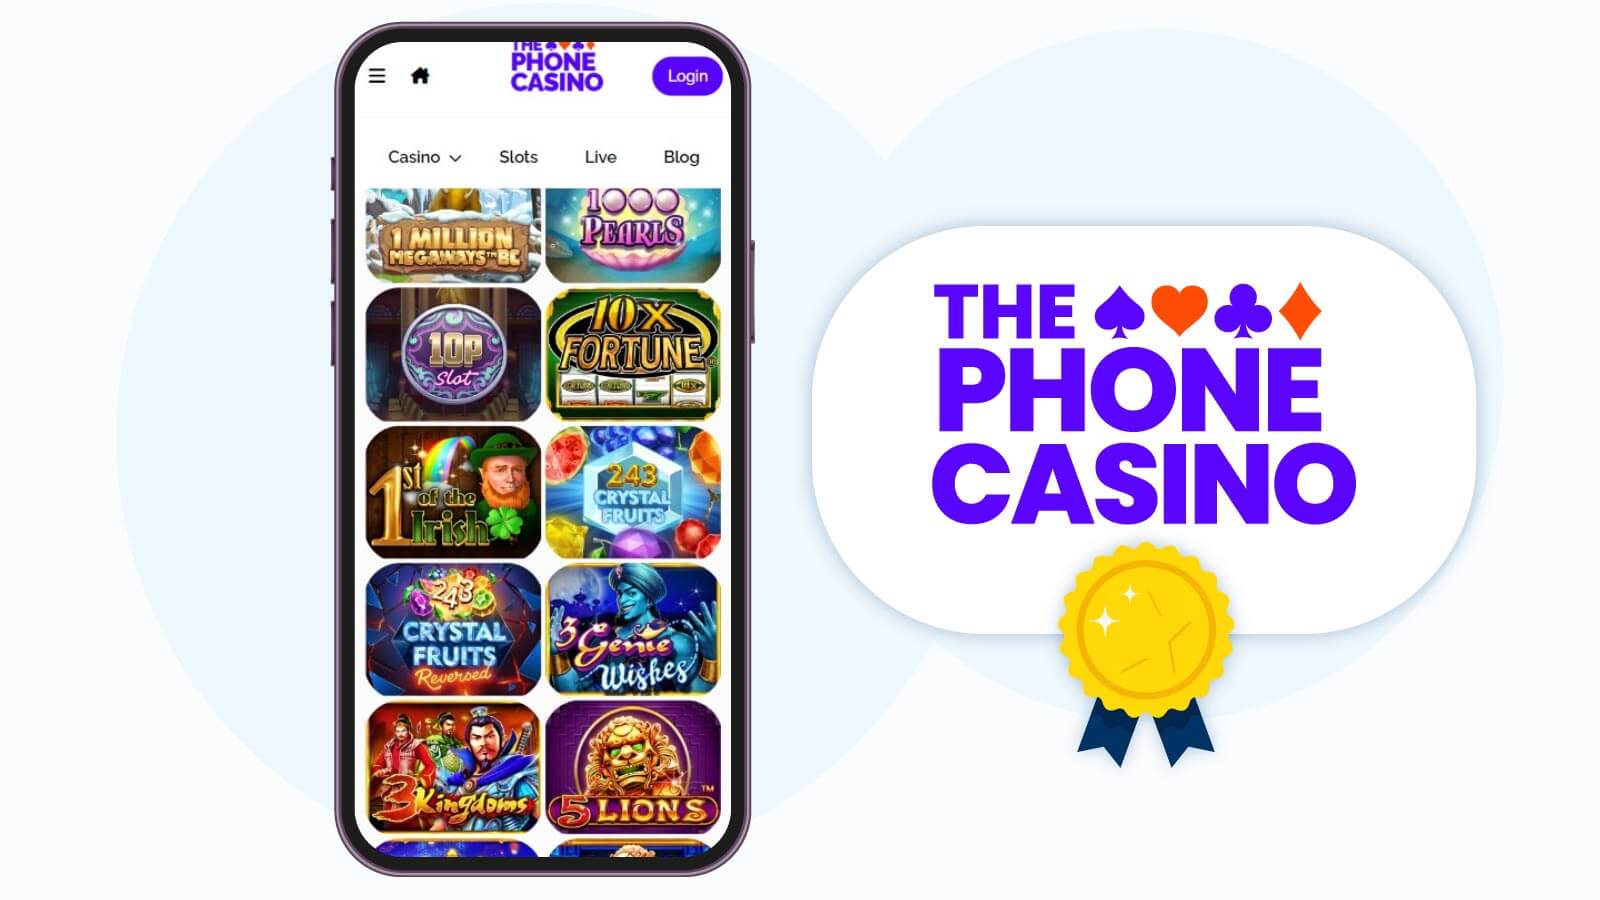 The-Phone-Casino-most-free-spins-on-mobile-verification